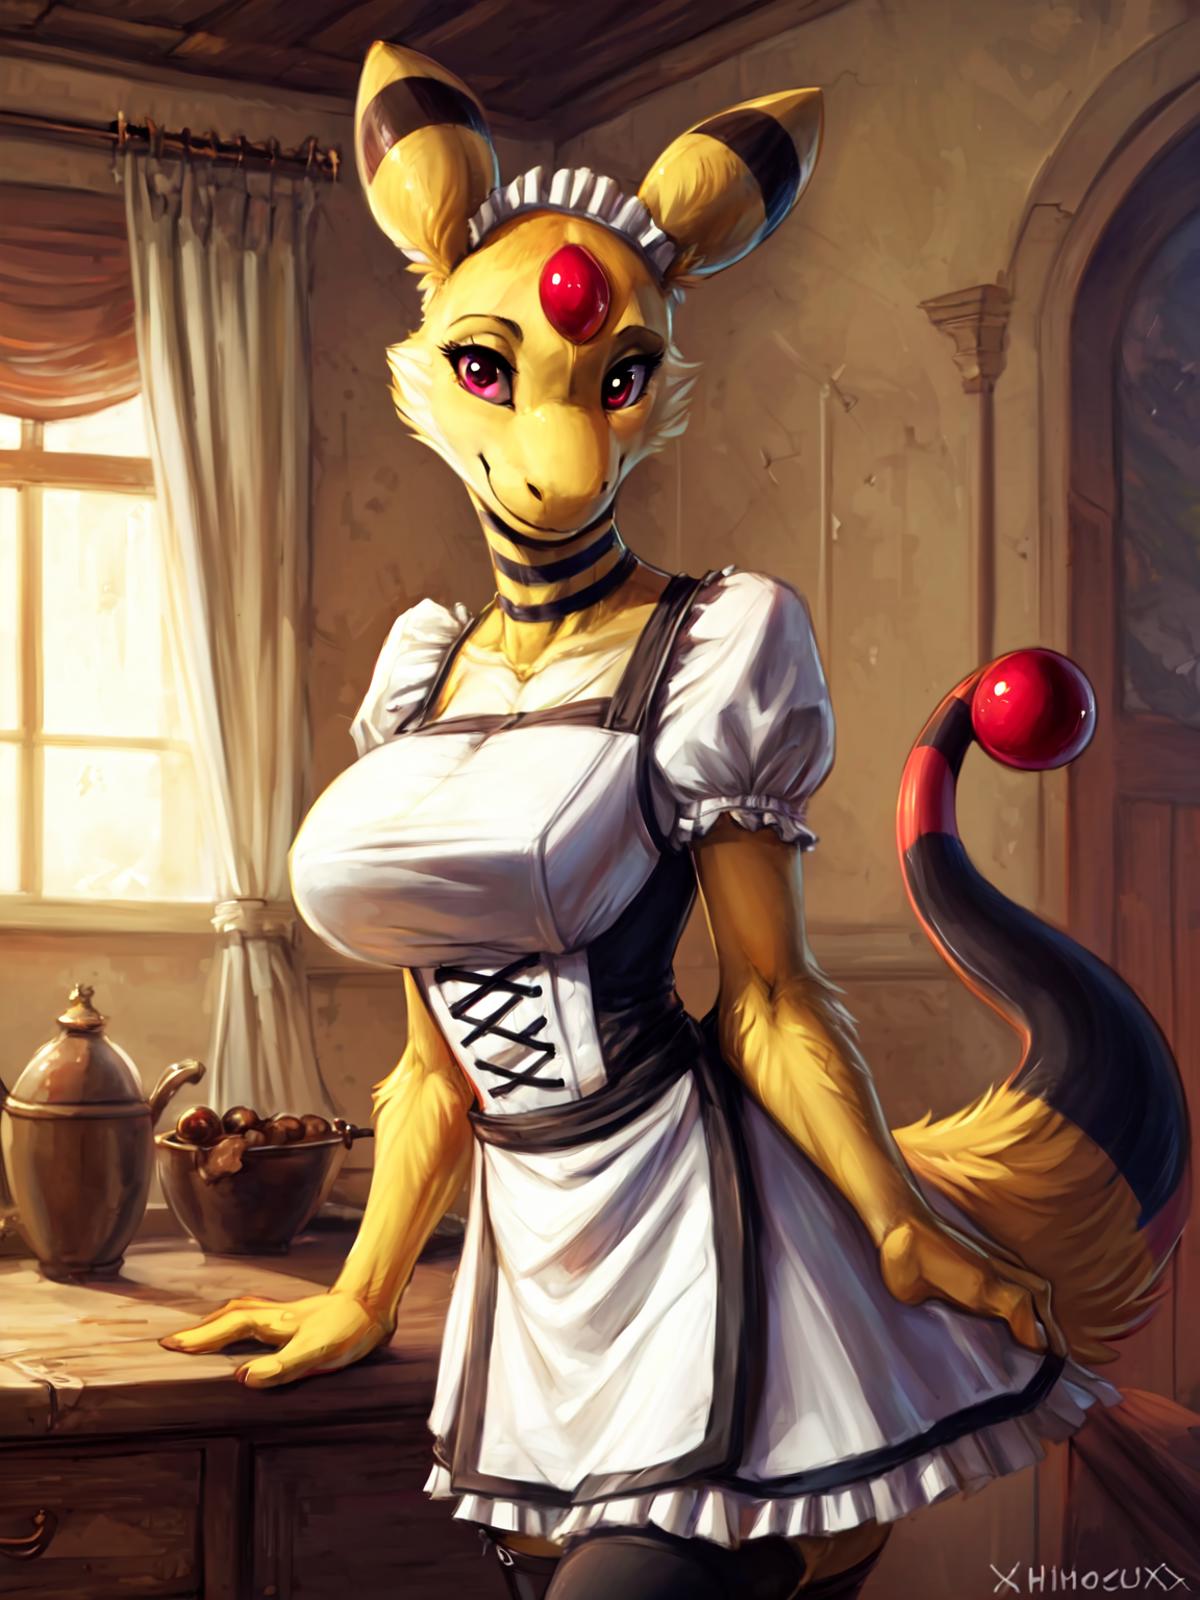 Ampharos image by neilarmstron12